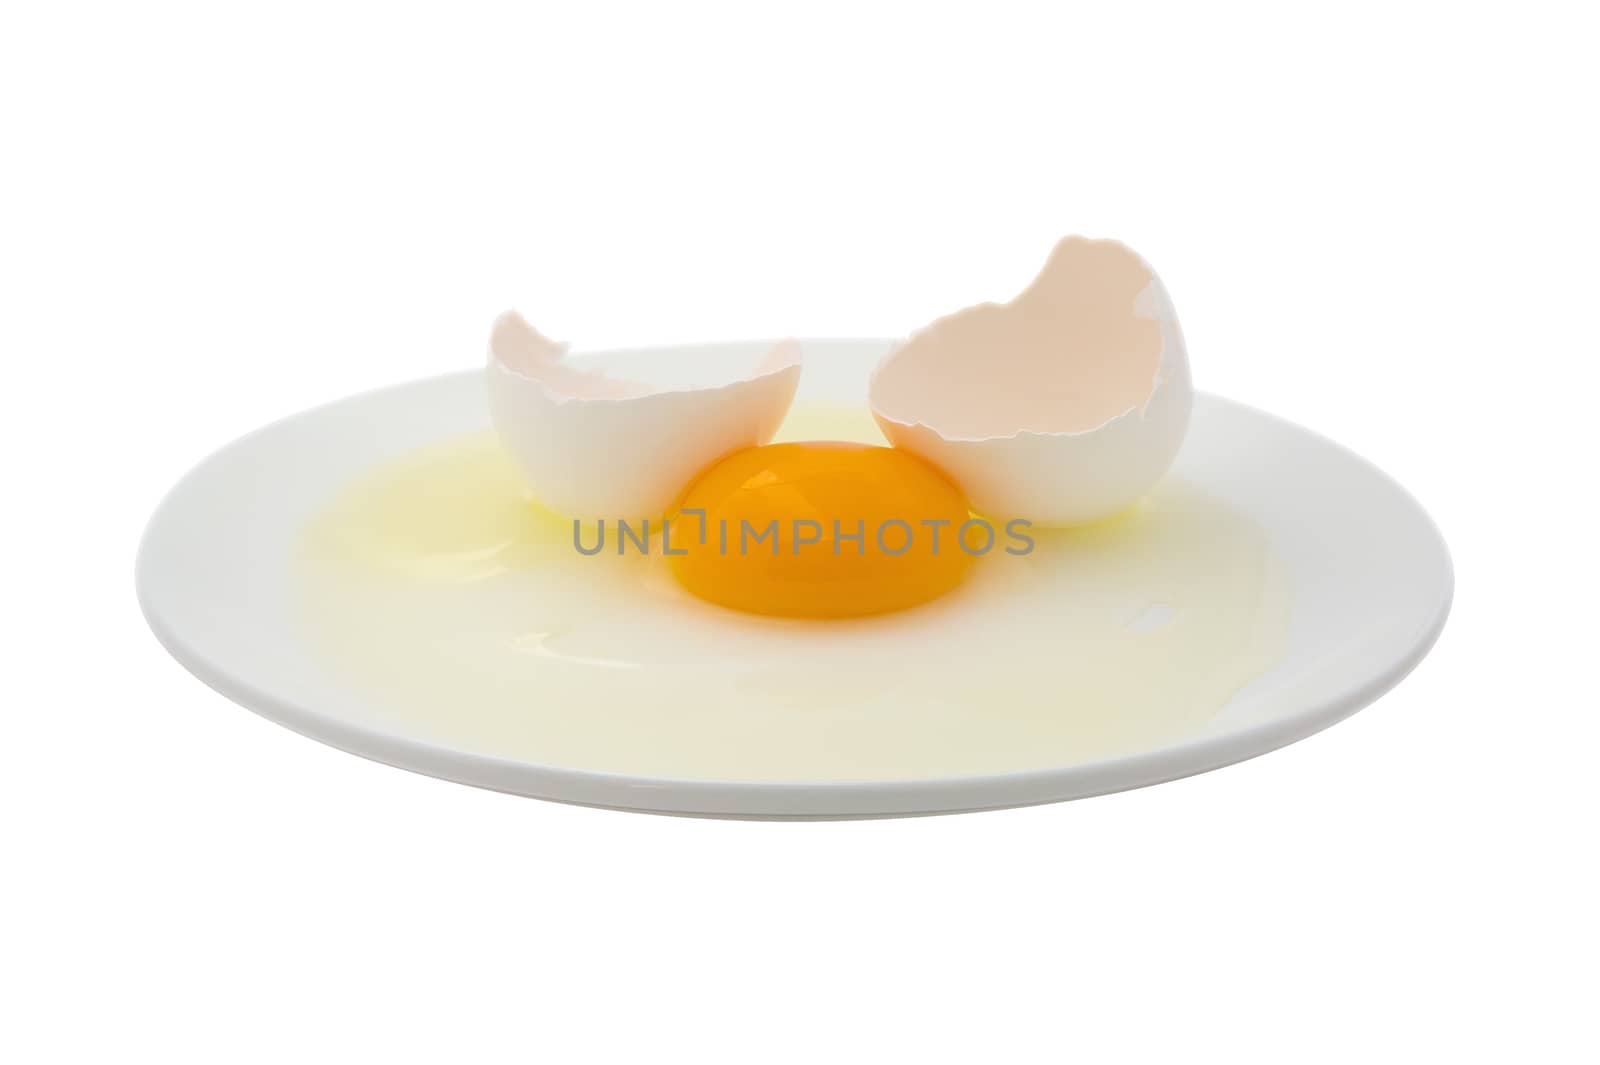 Broken egg on a dish isolated on a white. Clipping path included.